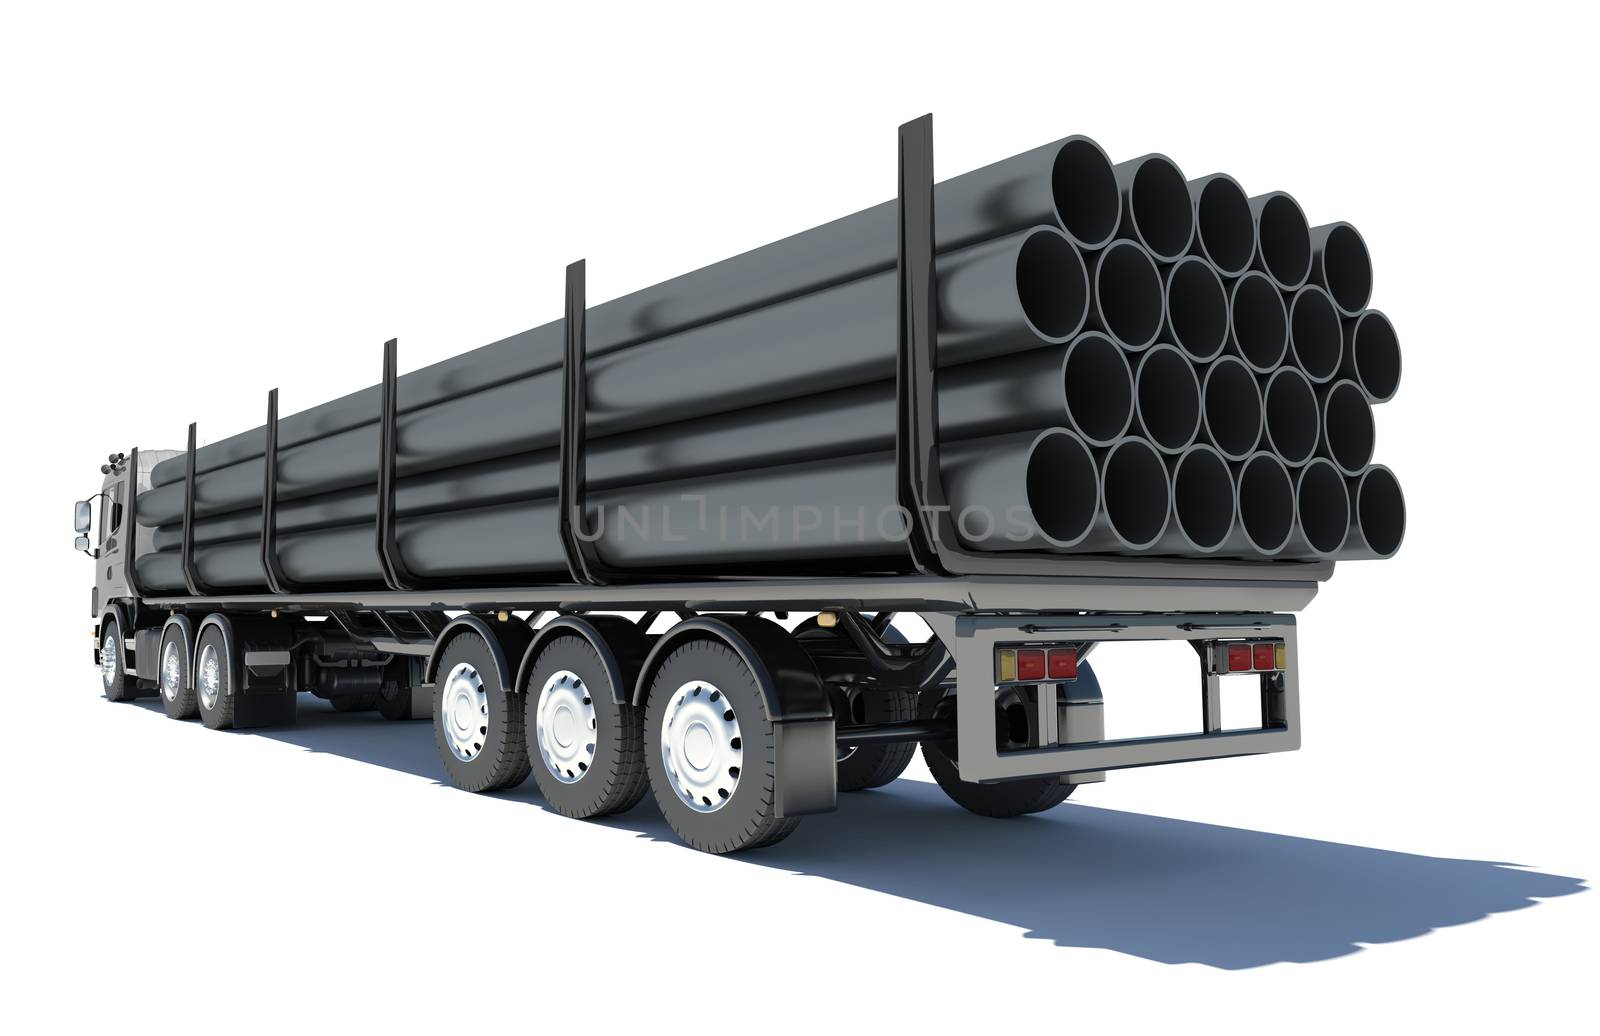 Truck transporting pipe. Rear view. Isolated render on a white background